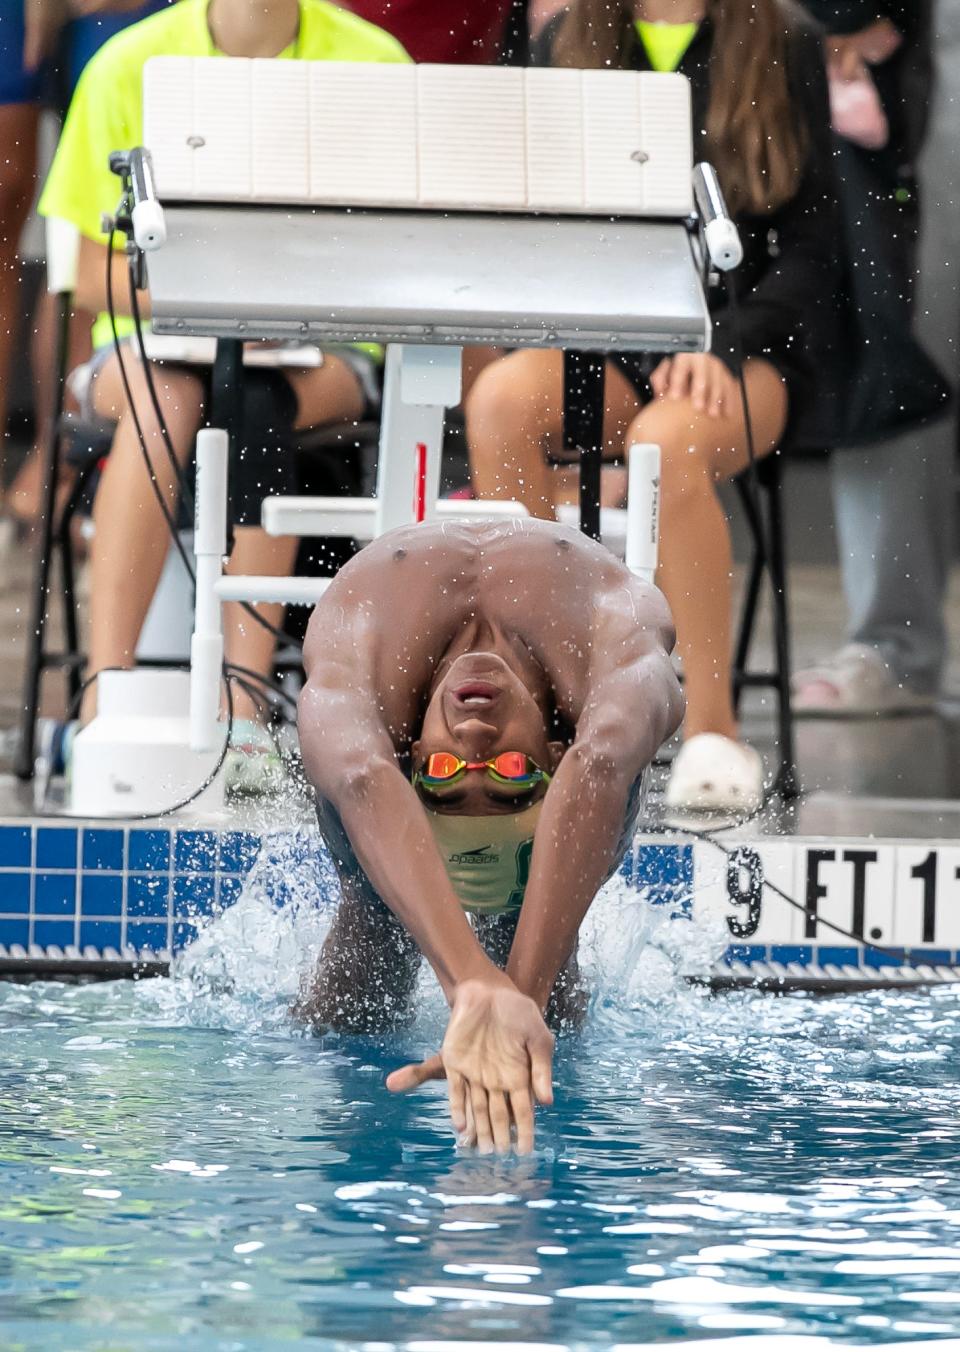 Trinity Catholic’s Xavier Washington starts the 100 yard backstroke during the 2023 FHSAA 1A-2A Swimming and Diving Championship at FAST in Ocala, FL on Saturday, November 4, 2023. [Alan Youngblood/Ocala Star-Banner]